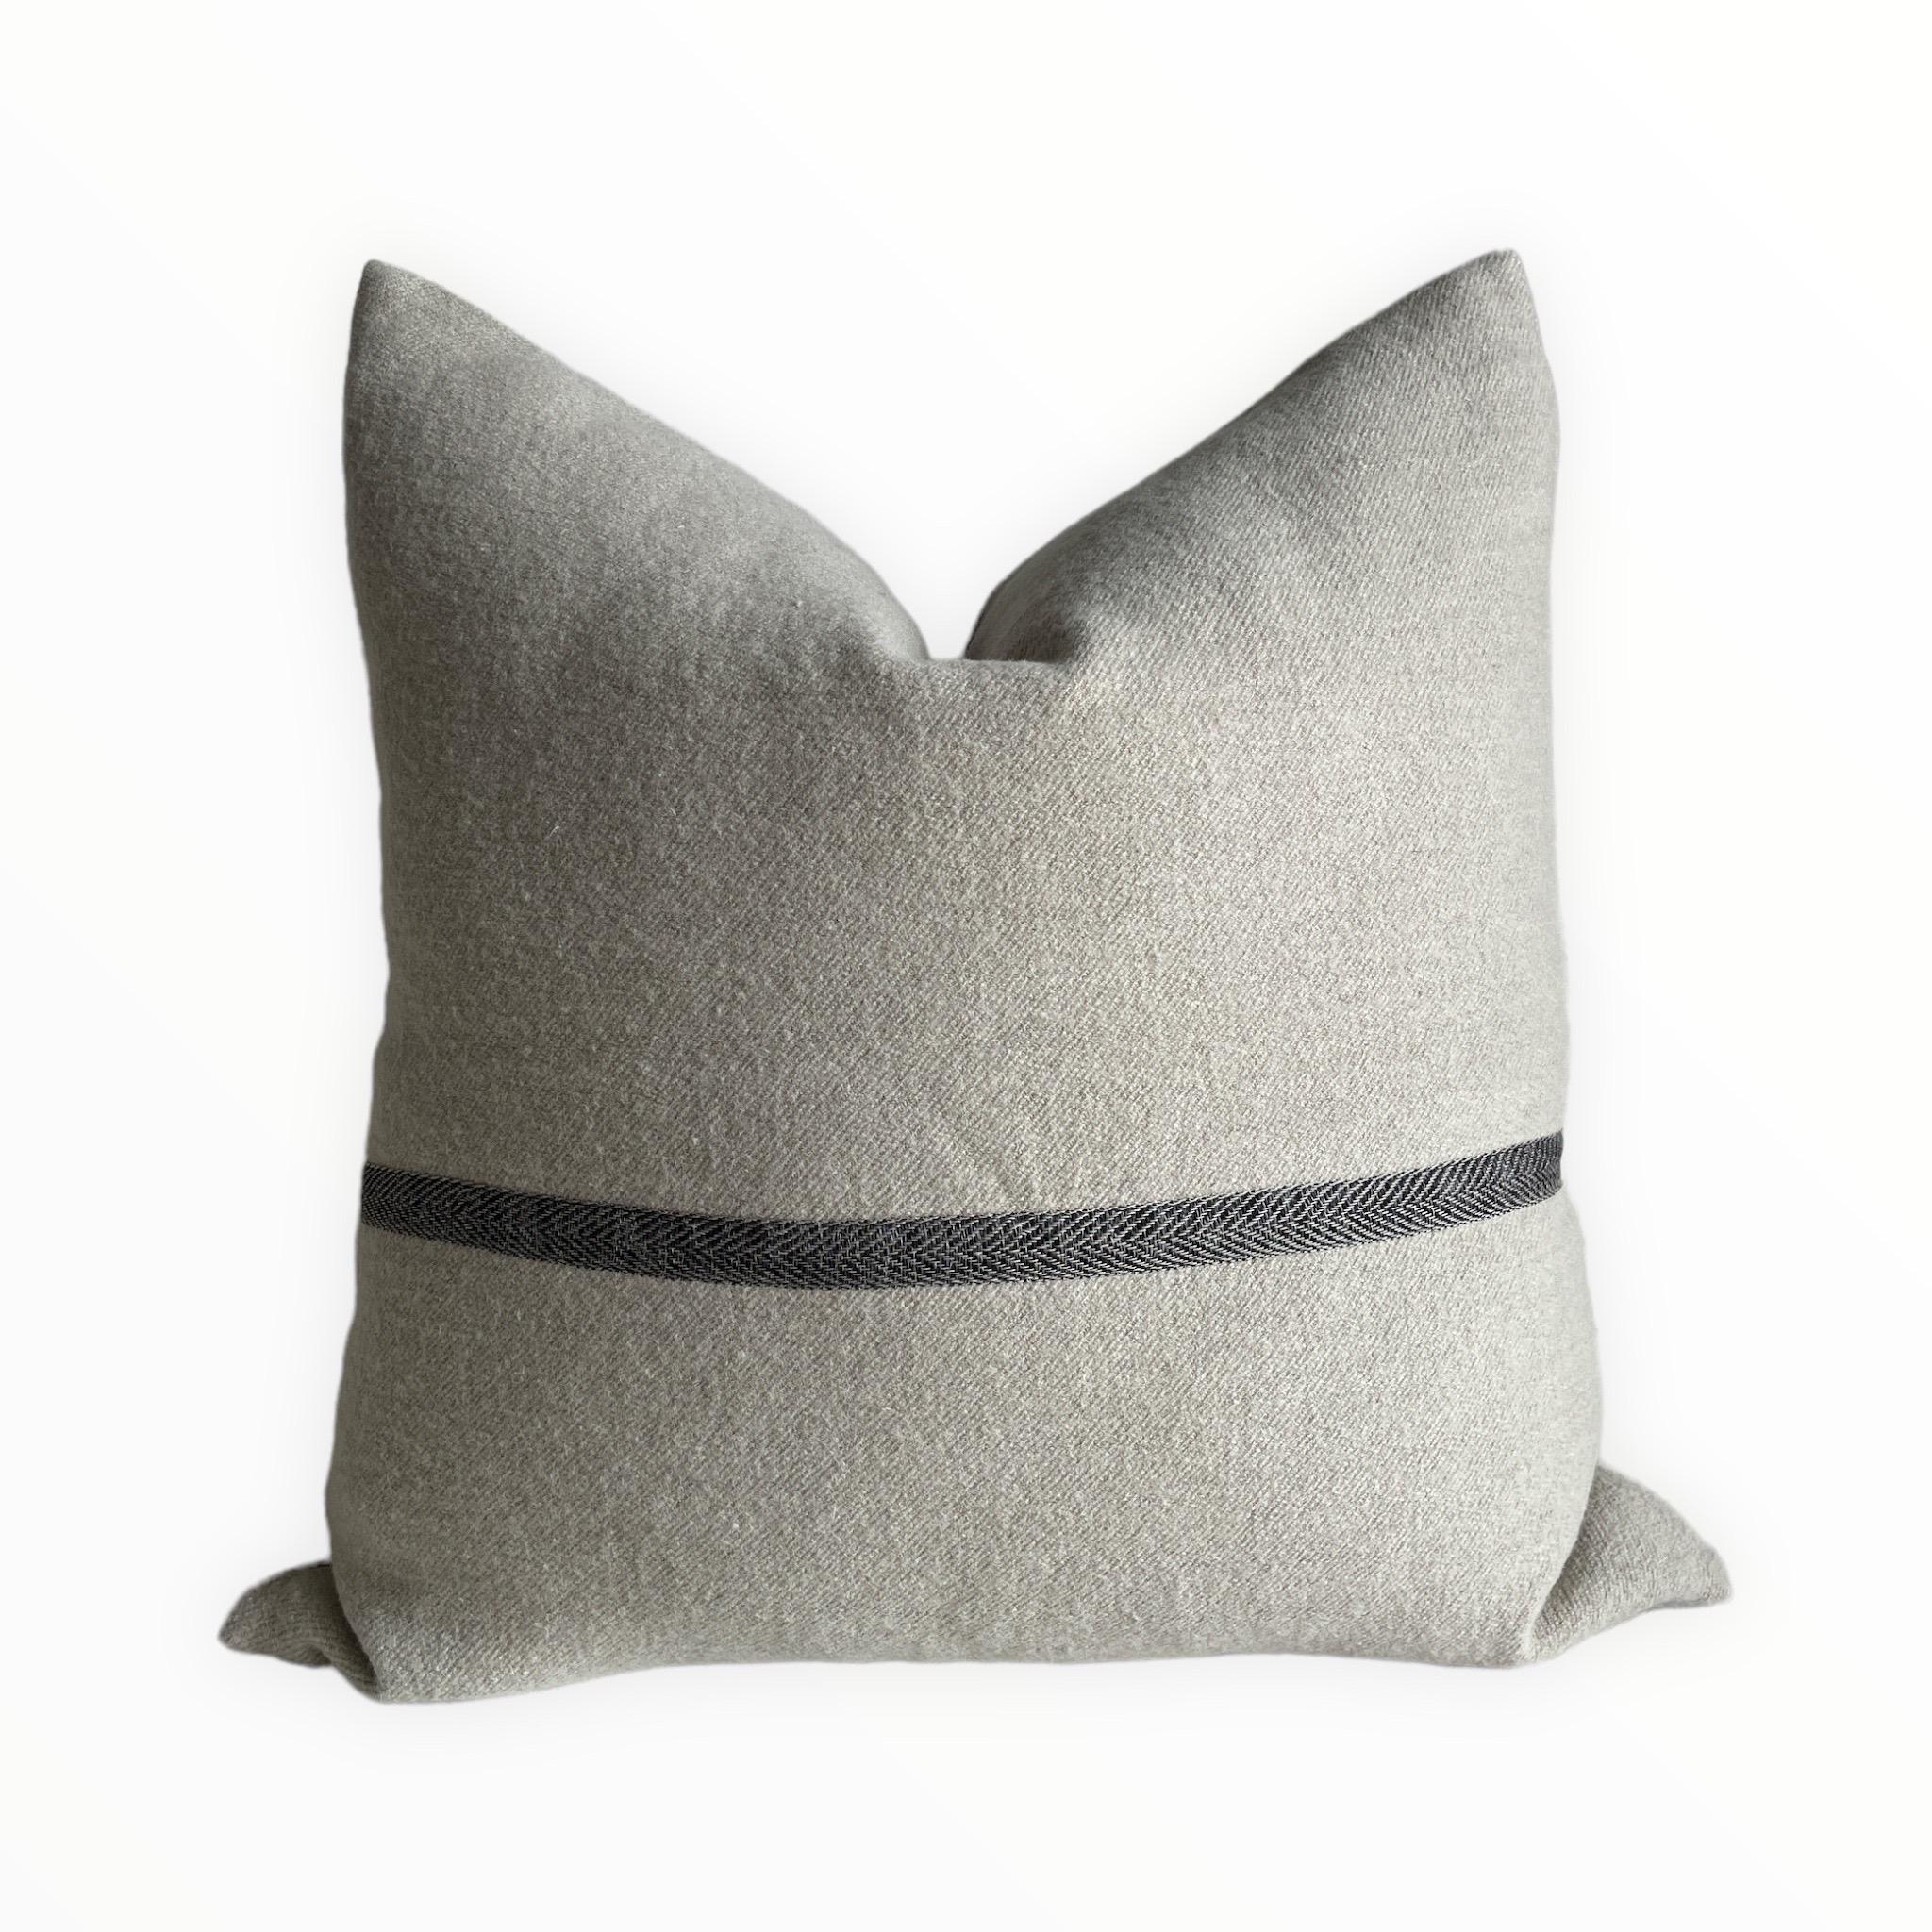 Belgian Linen and Wool Oversize Pillow Cover in Oatmeal and Coal For Sale 1